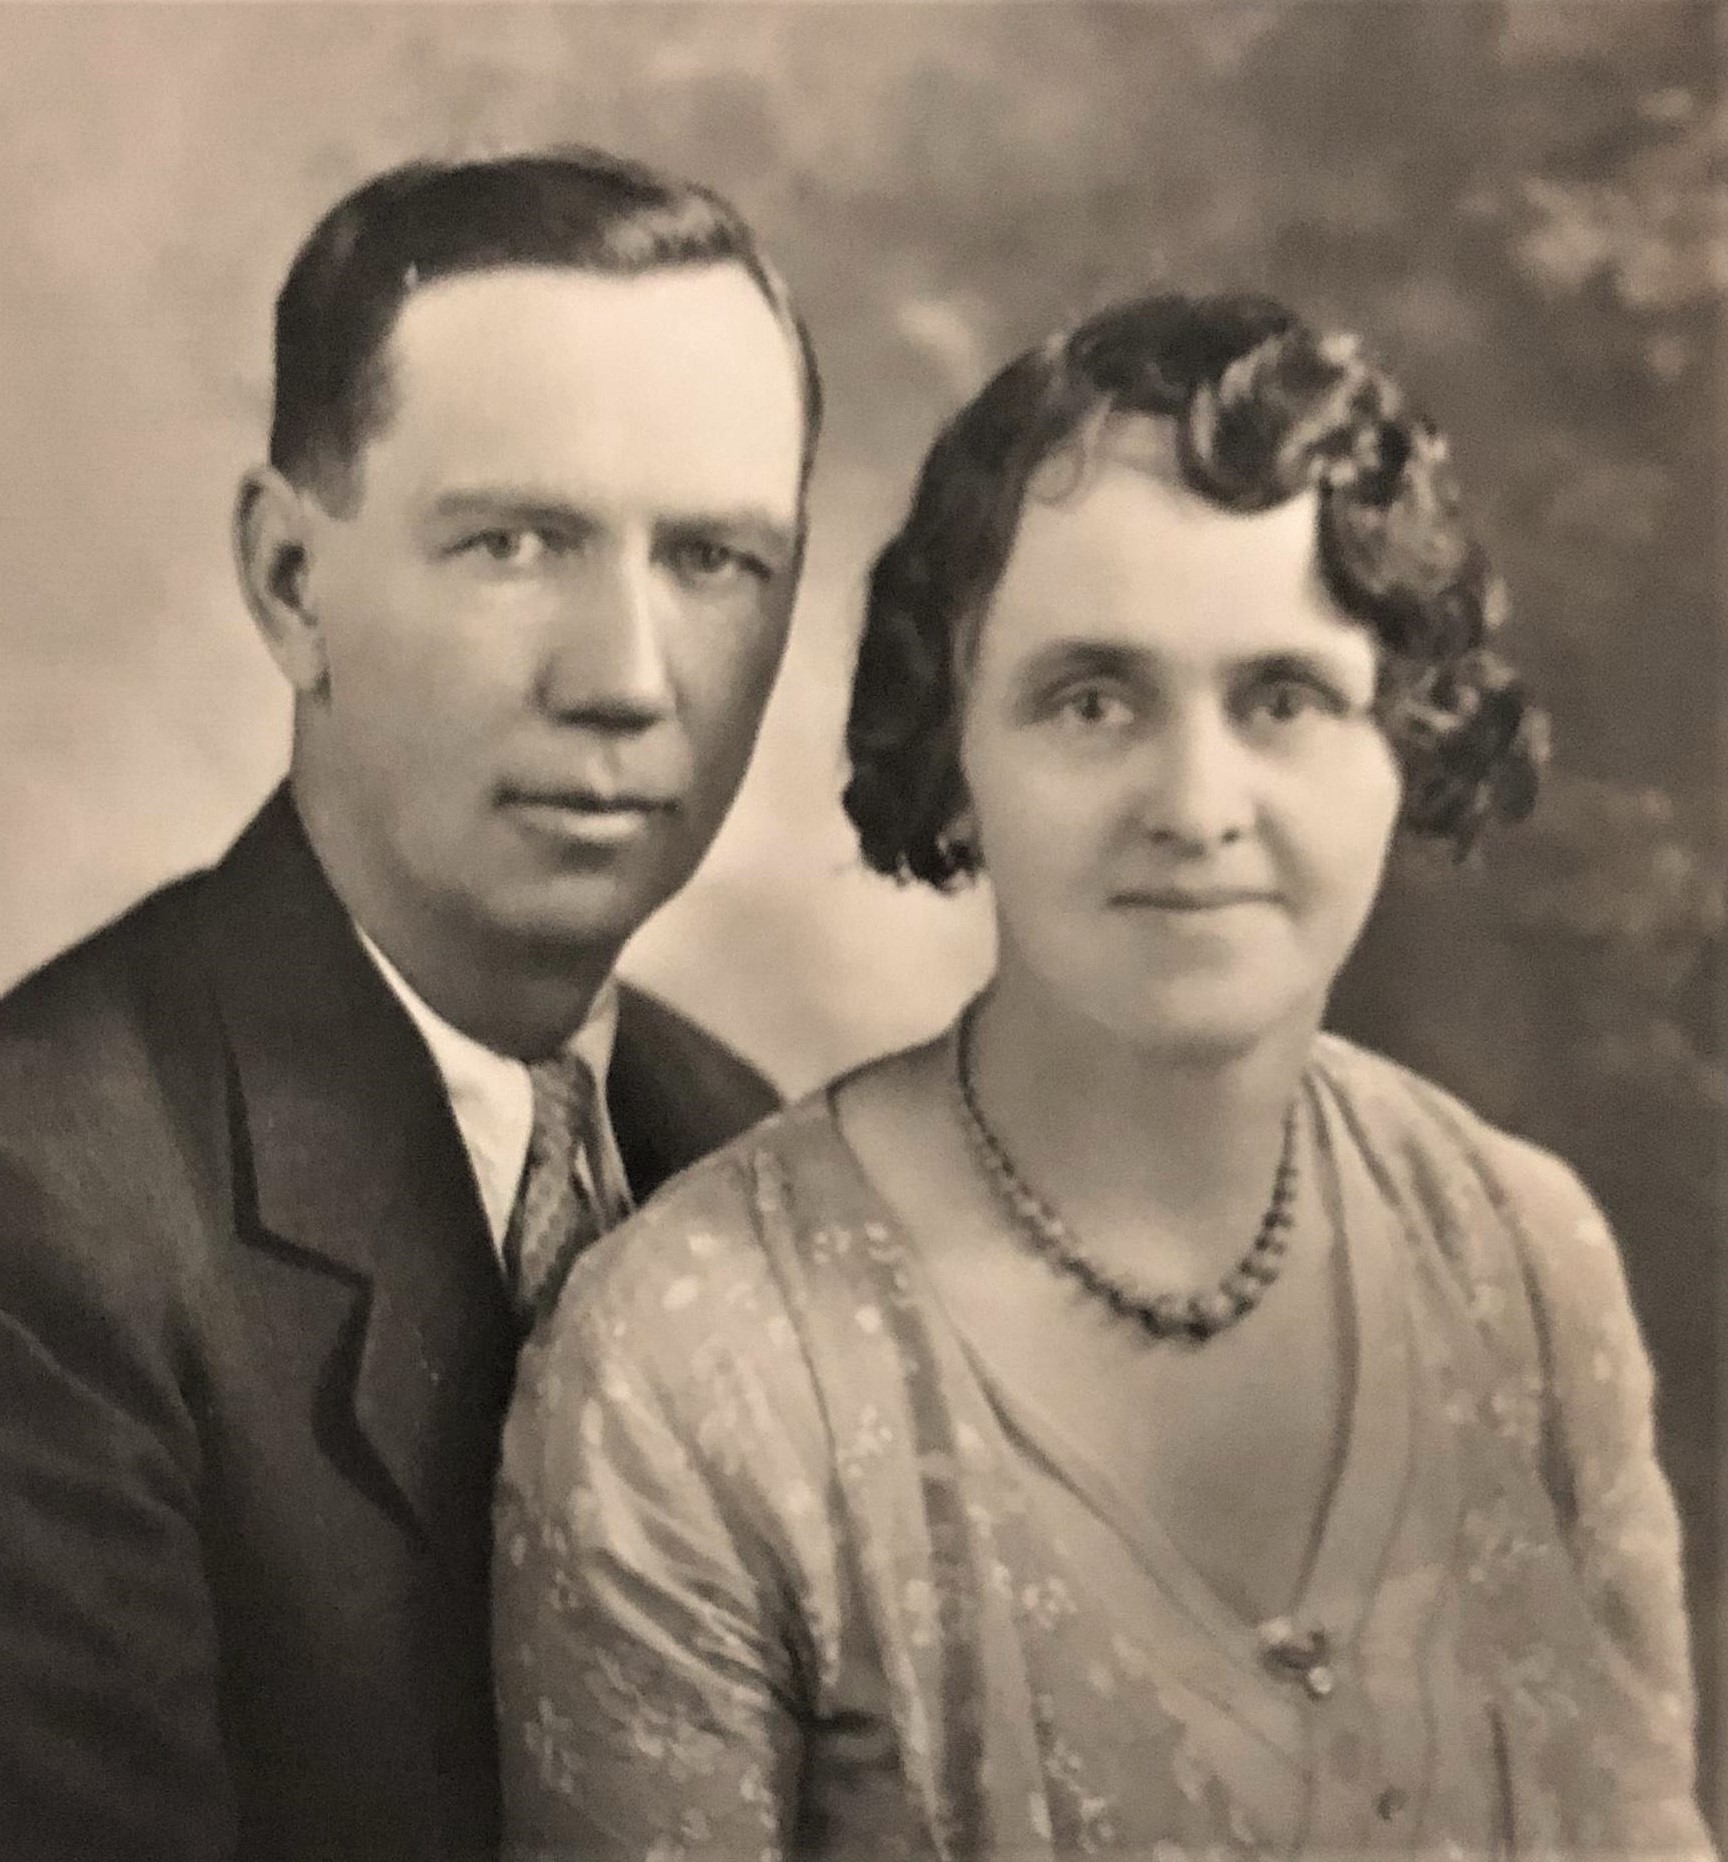 Thurza and Louis Boyle served together on 2 missions